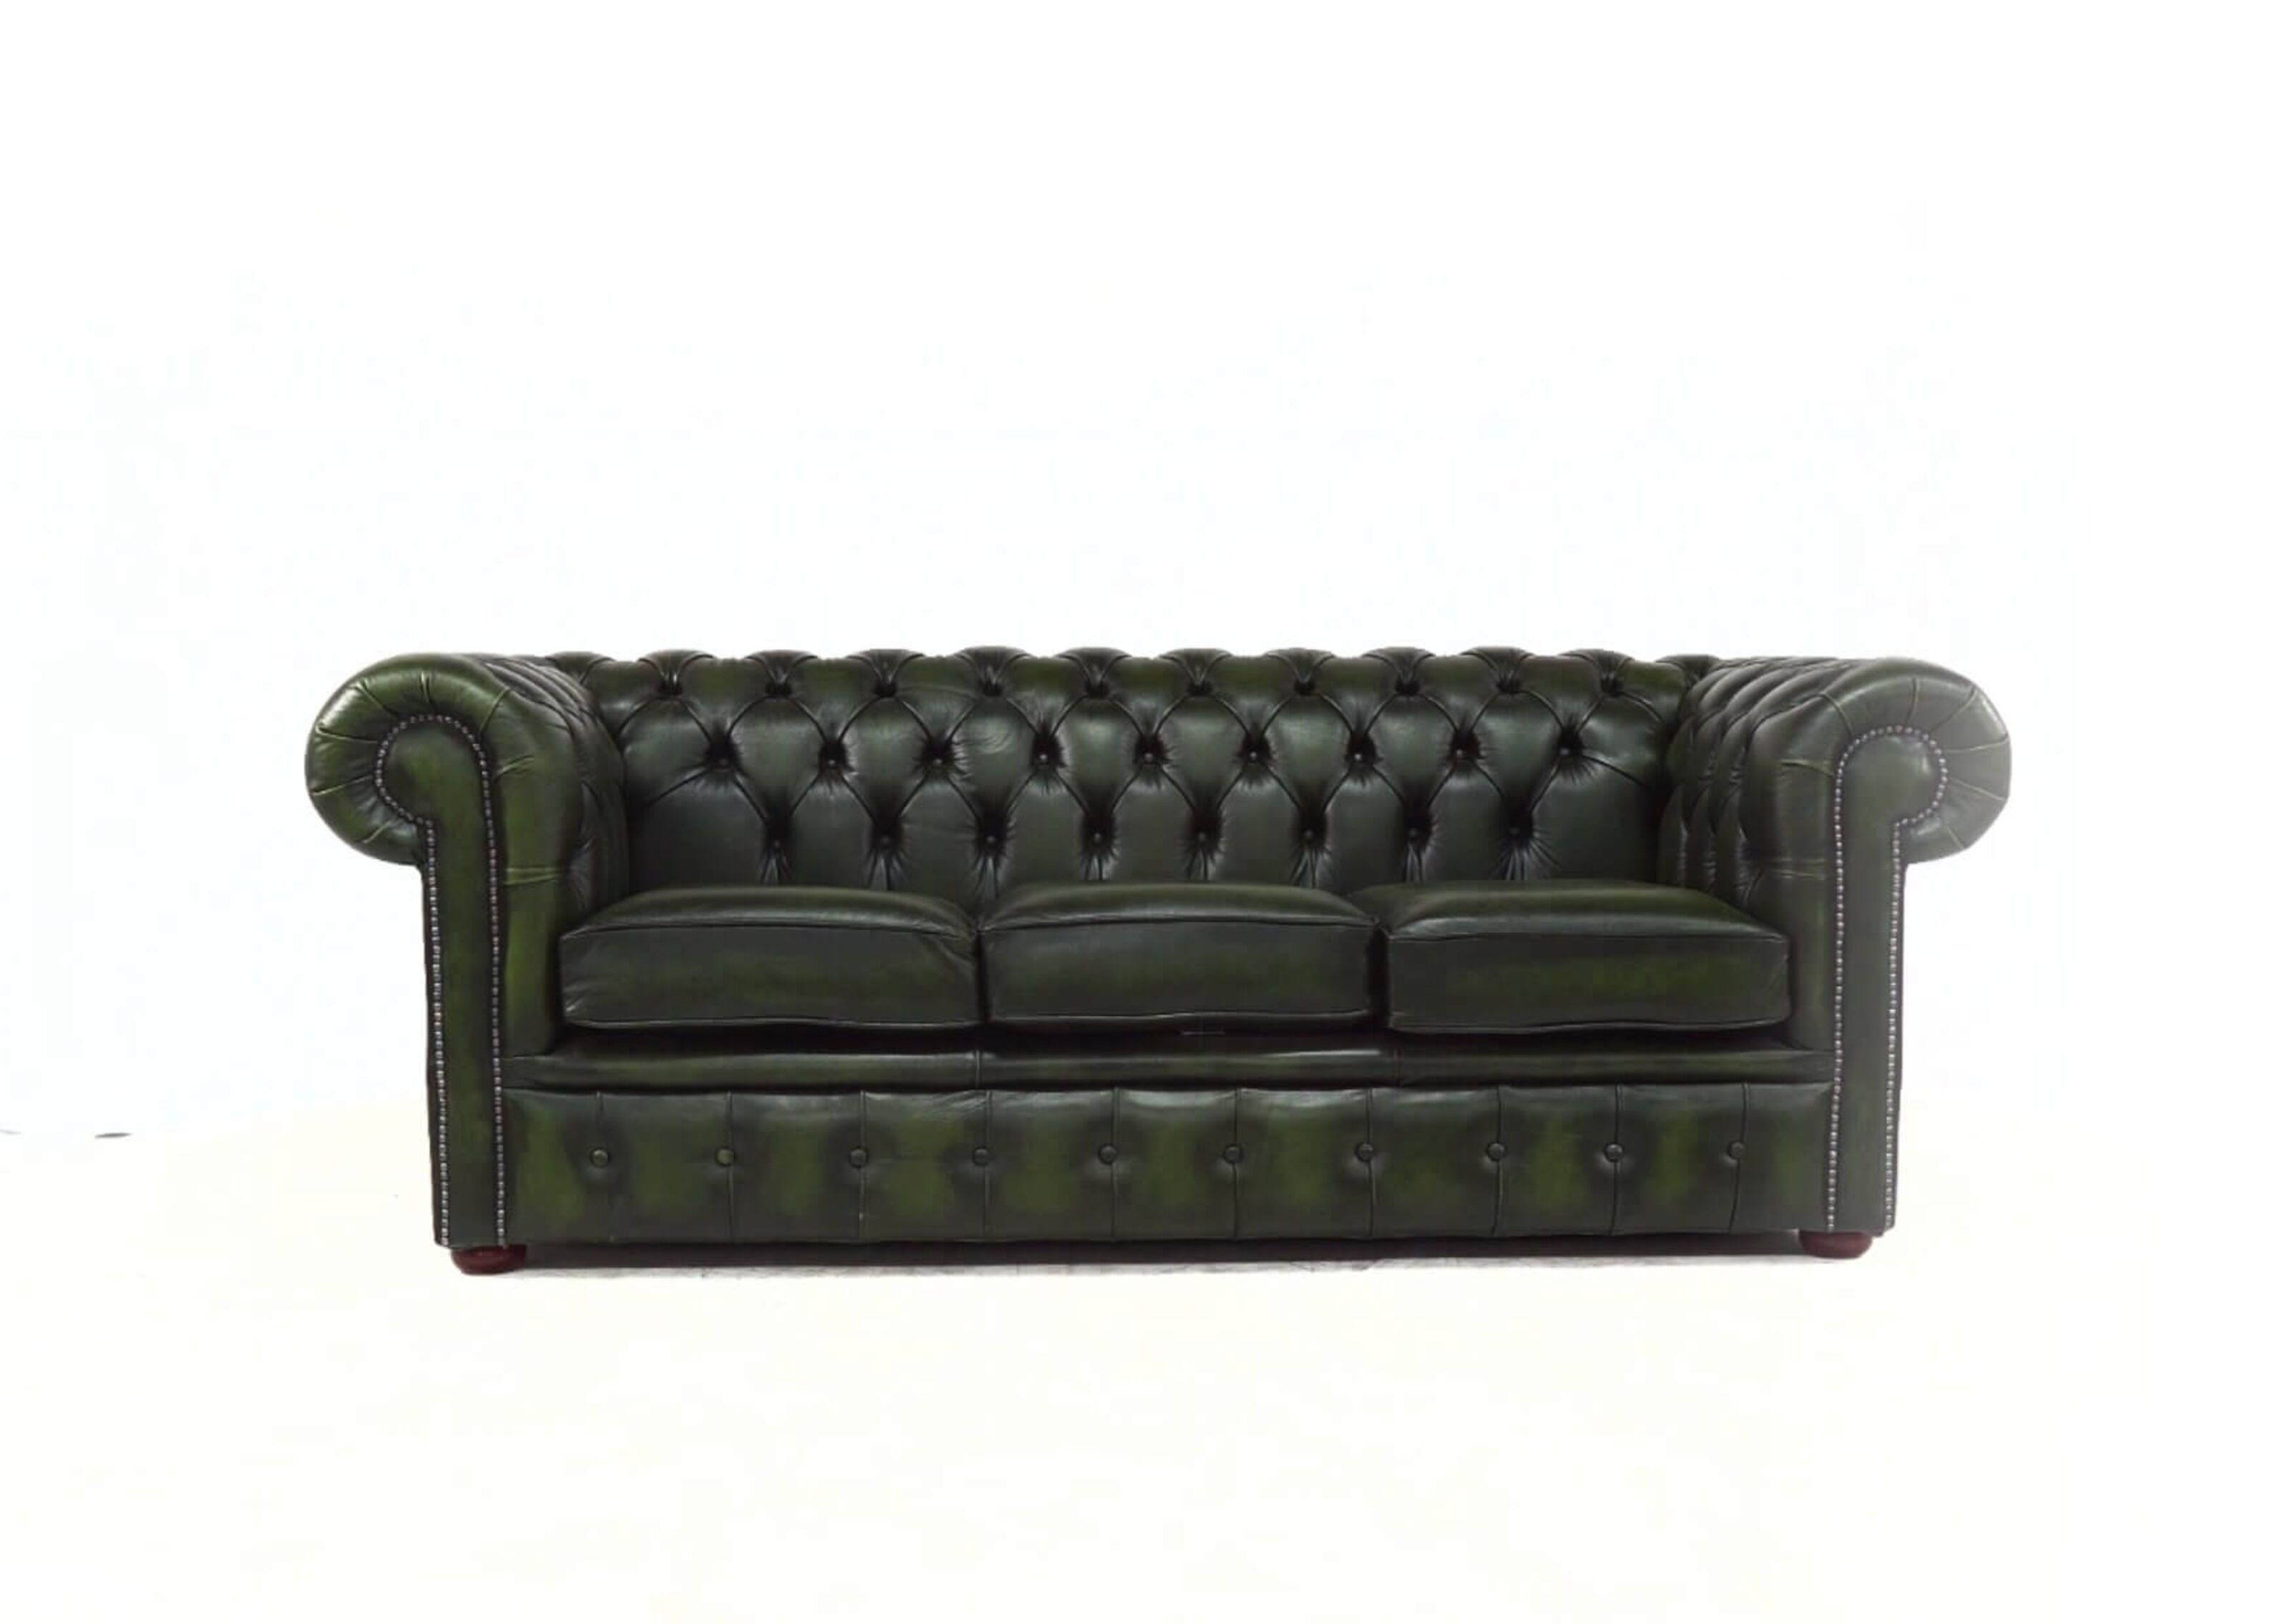 The Chesterfield Iconic Seating for Every Space  %Post Title